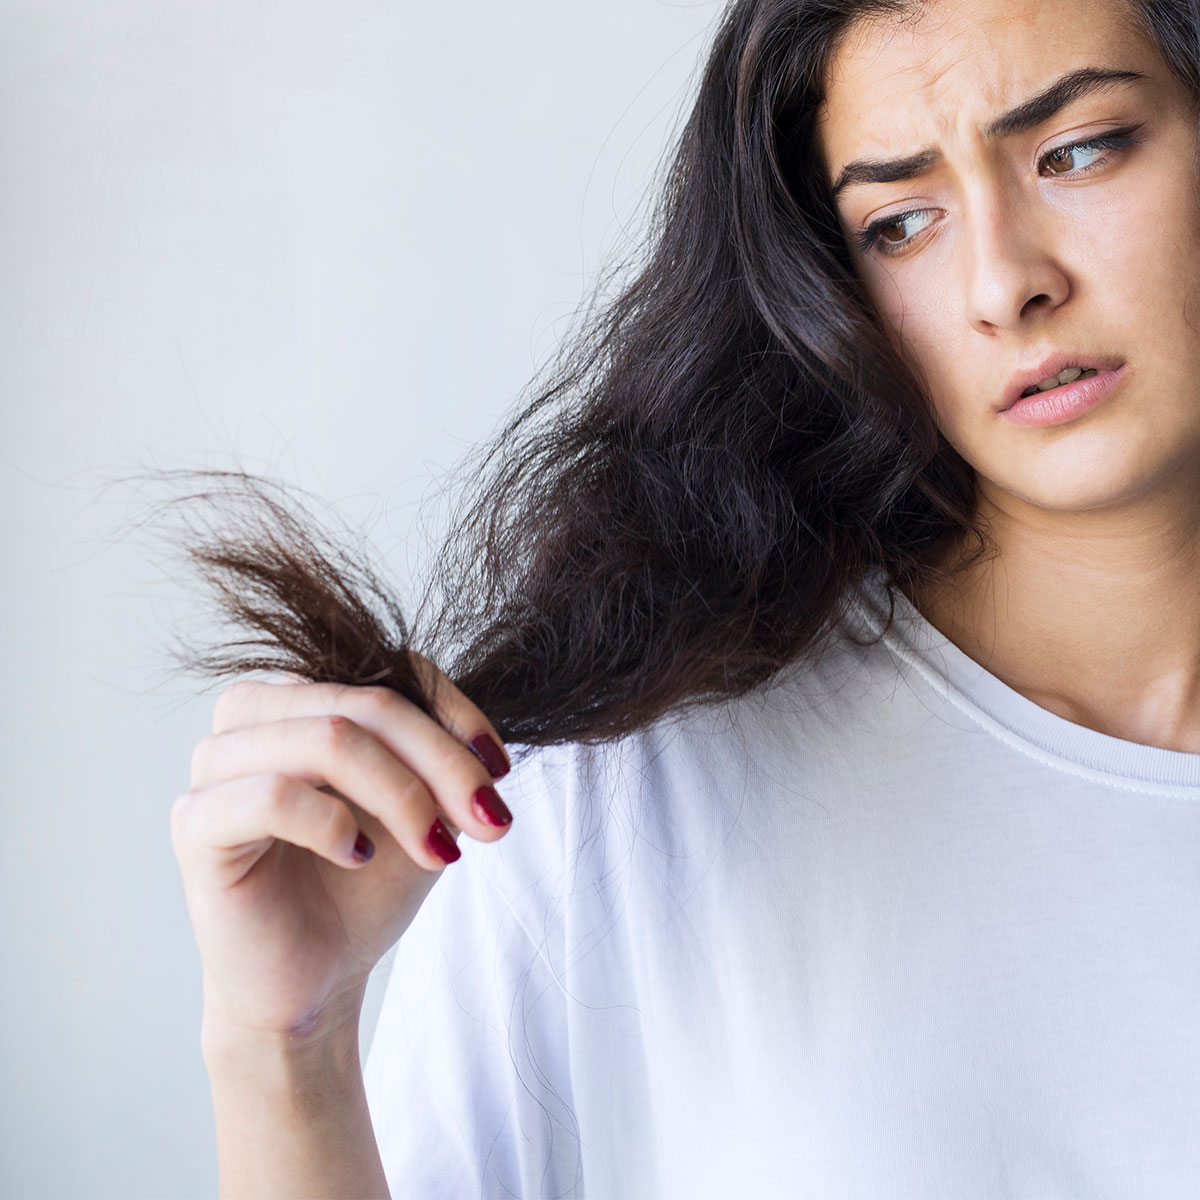 woman looking upset while holding split ends frizzy brown hair